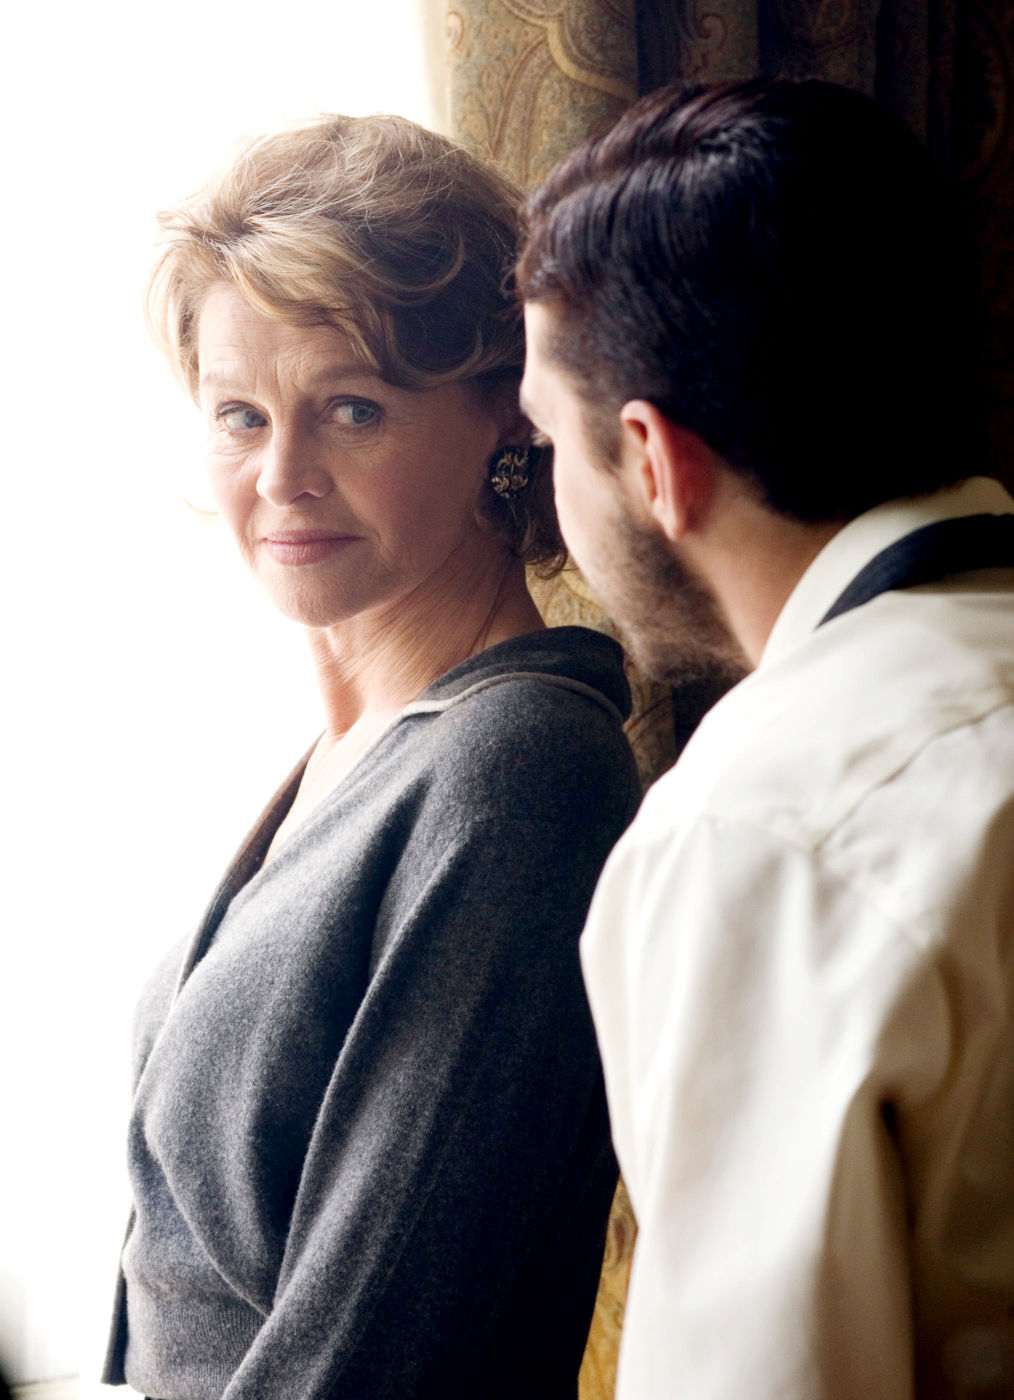 Julie Christie stars as Isabelle and Shia LaBeouf stars as Jacob in Vivendi Entertainment's New York, I Love You (2009)